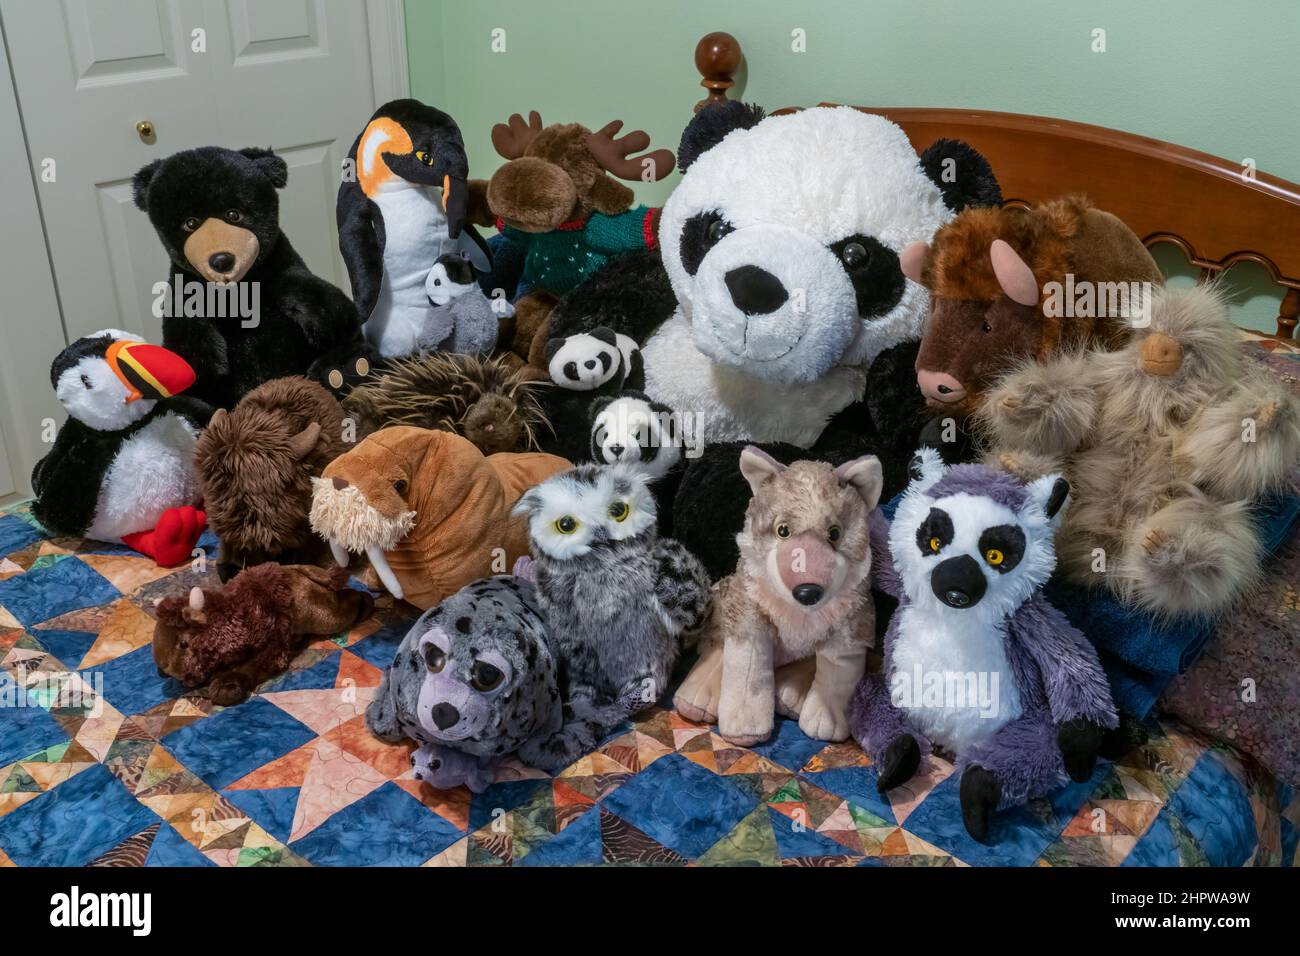 Portrait of a group of stuffed animals on a bed. Stock Photo